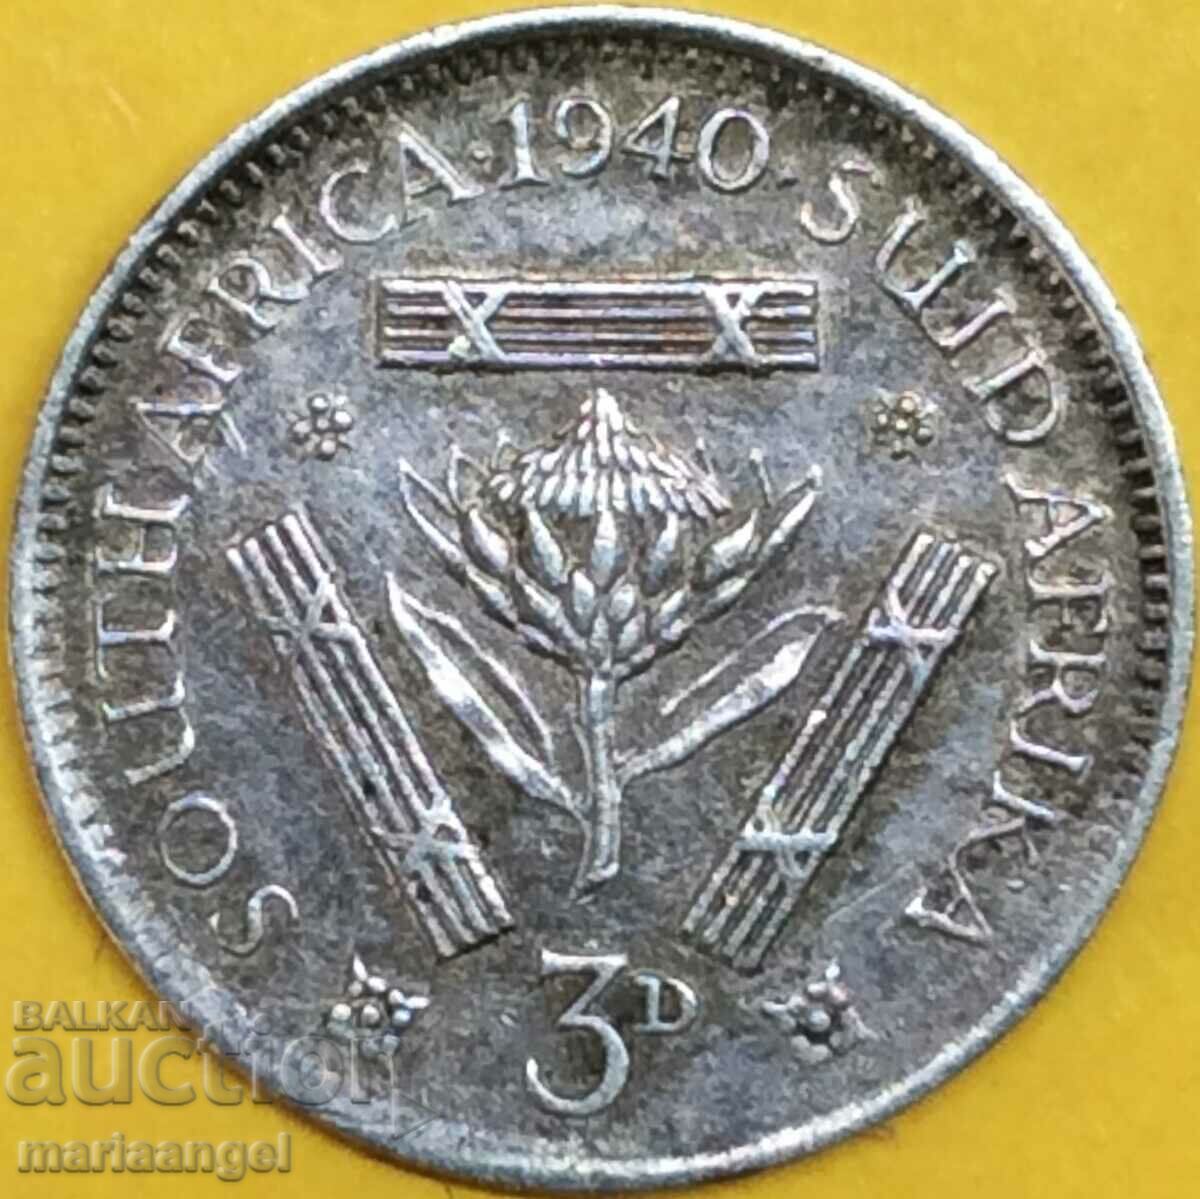 South Africa 3 pence 1940 George VI Silver